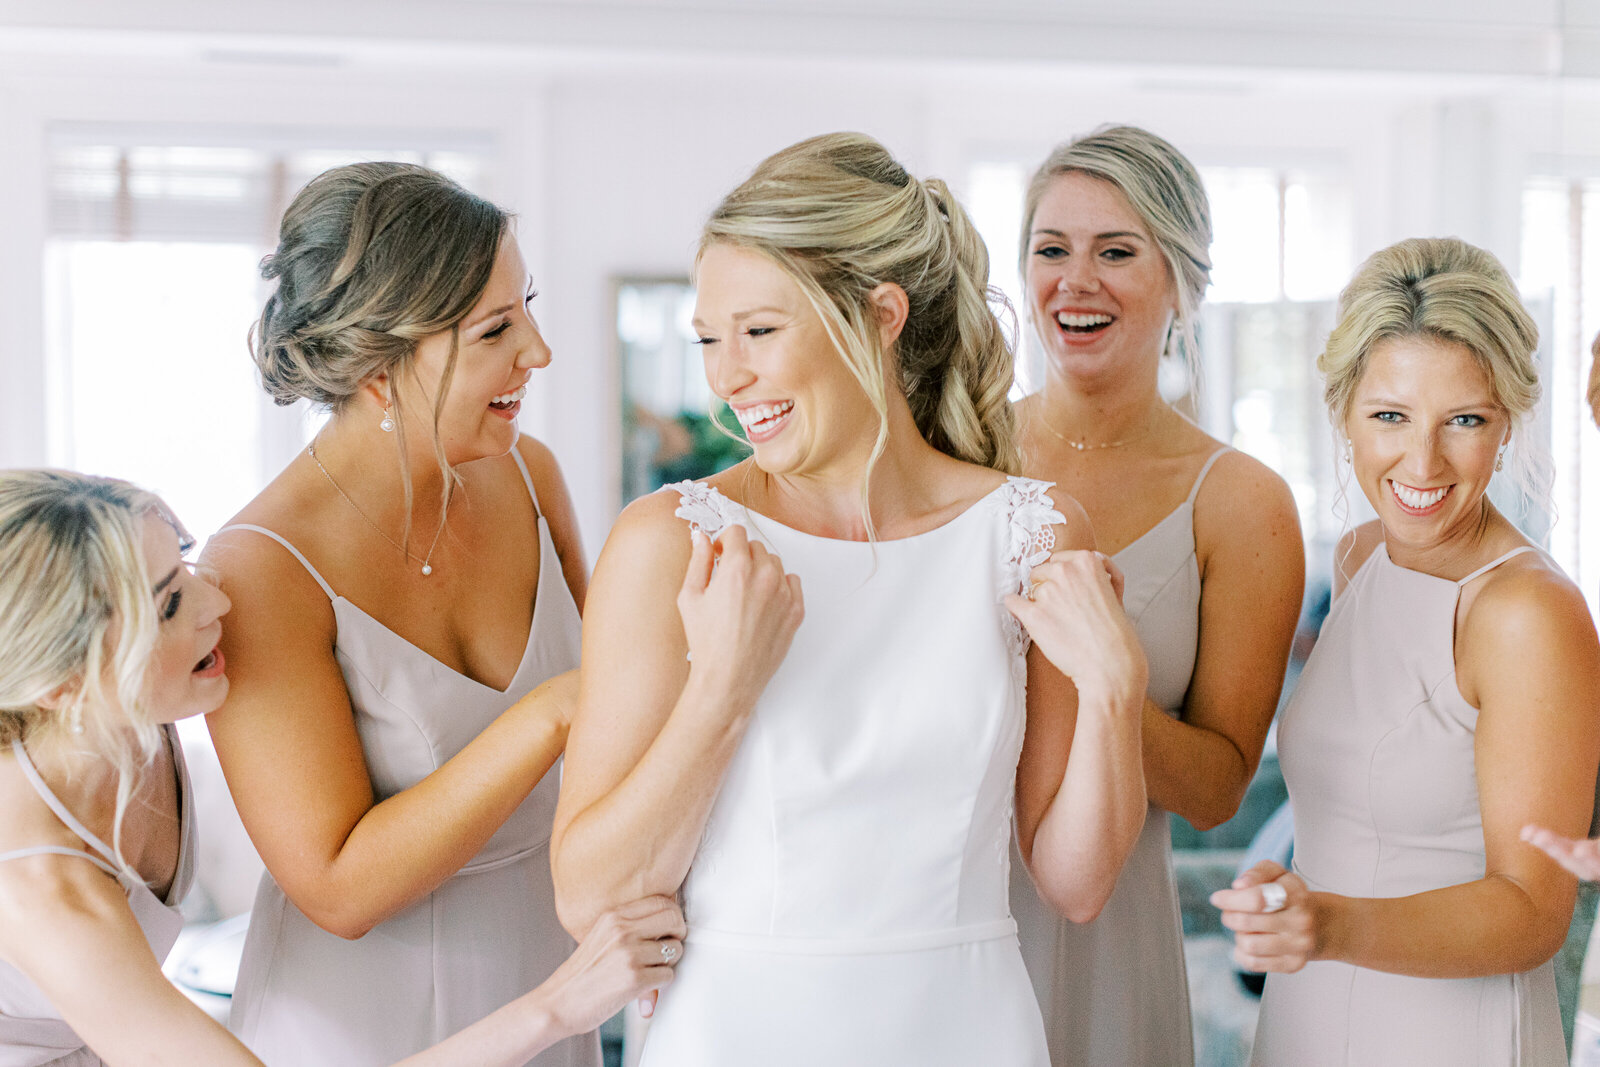 Bride laughing with bridesmaids before ceremony.